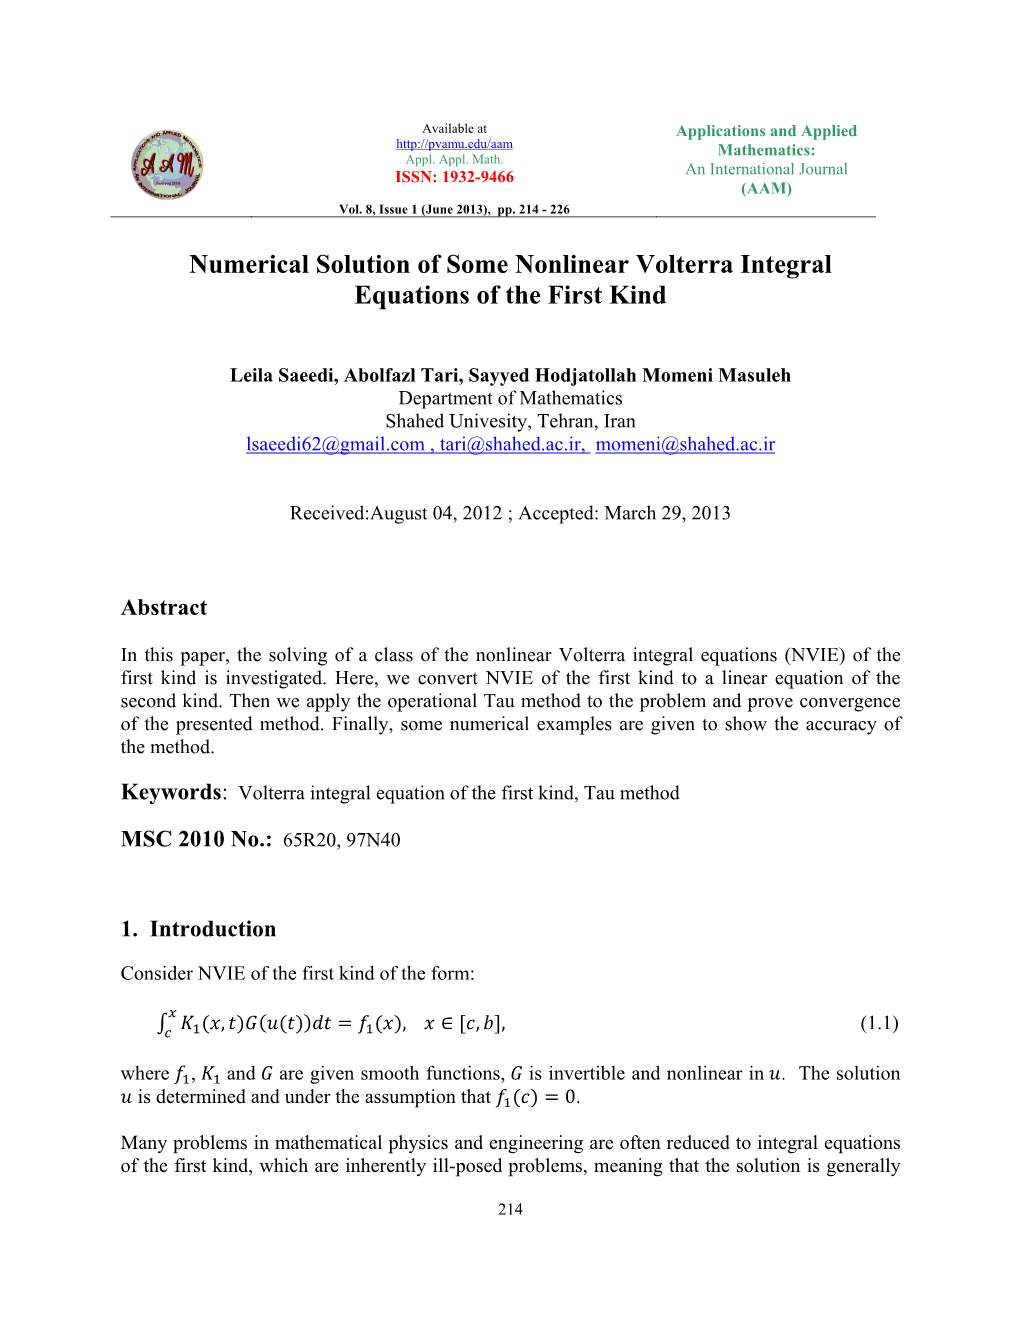 Numerical Solution of Some Nonlinear Volterra Integral Equations of the First Kind